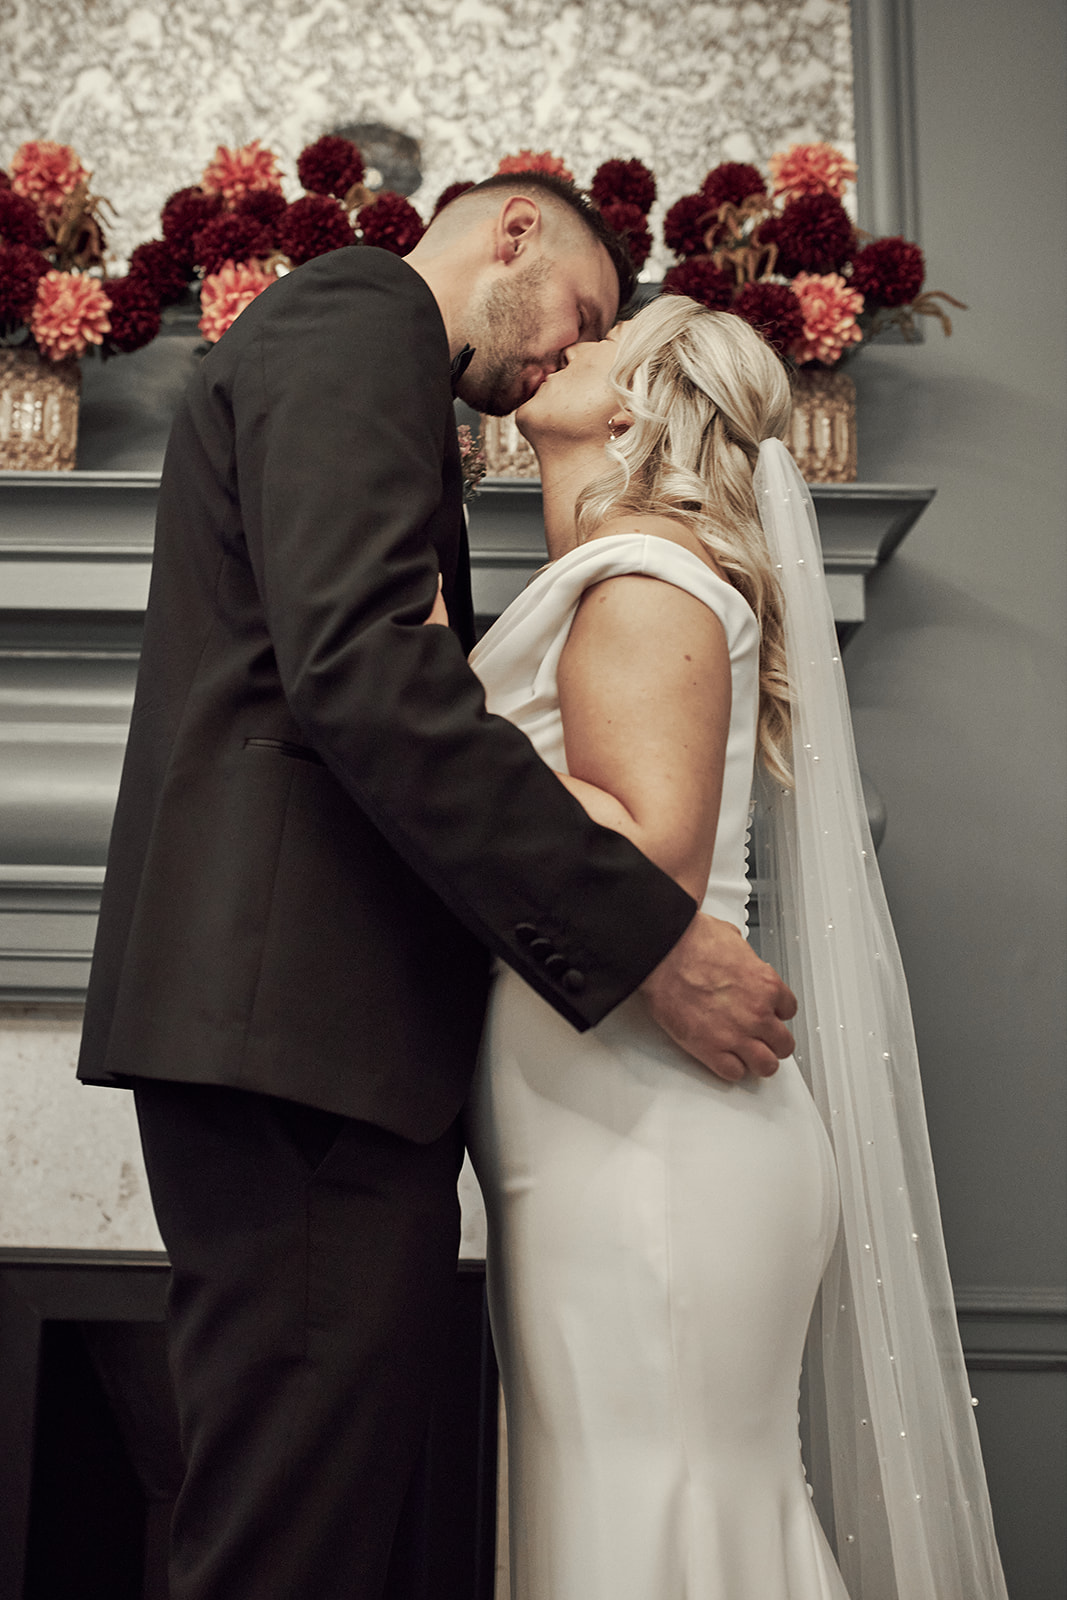 Katy and Max share kiss during the wedding ceremony in the Soho Room at Marylebone Town Hall